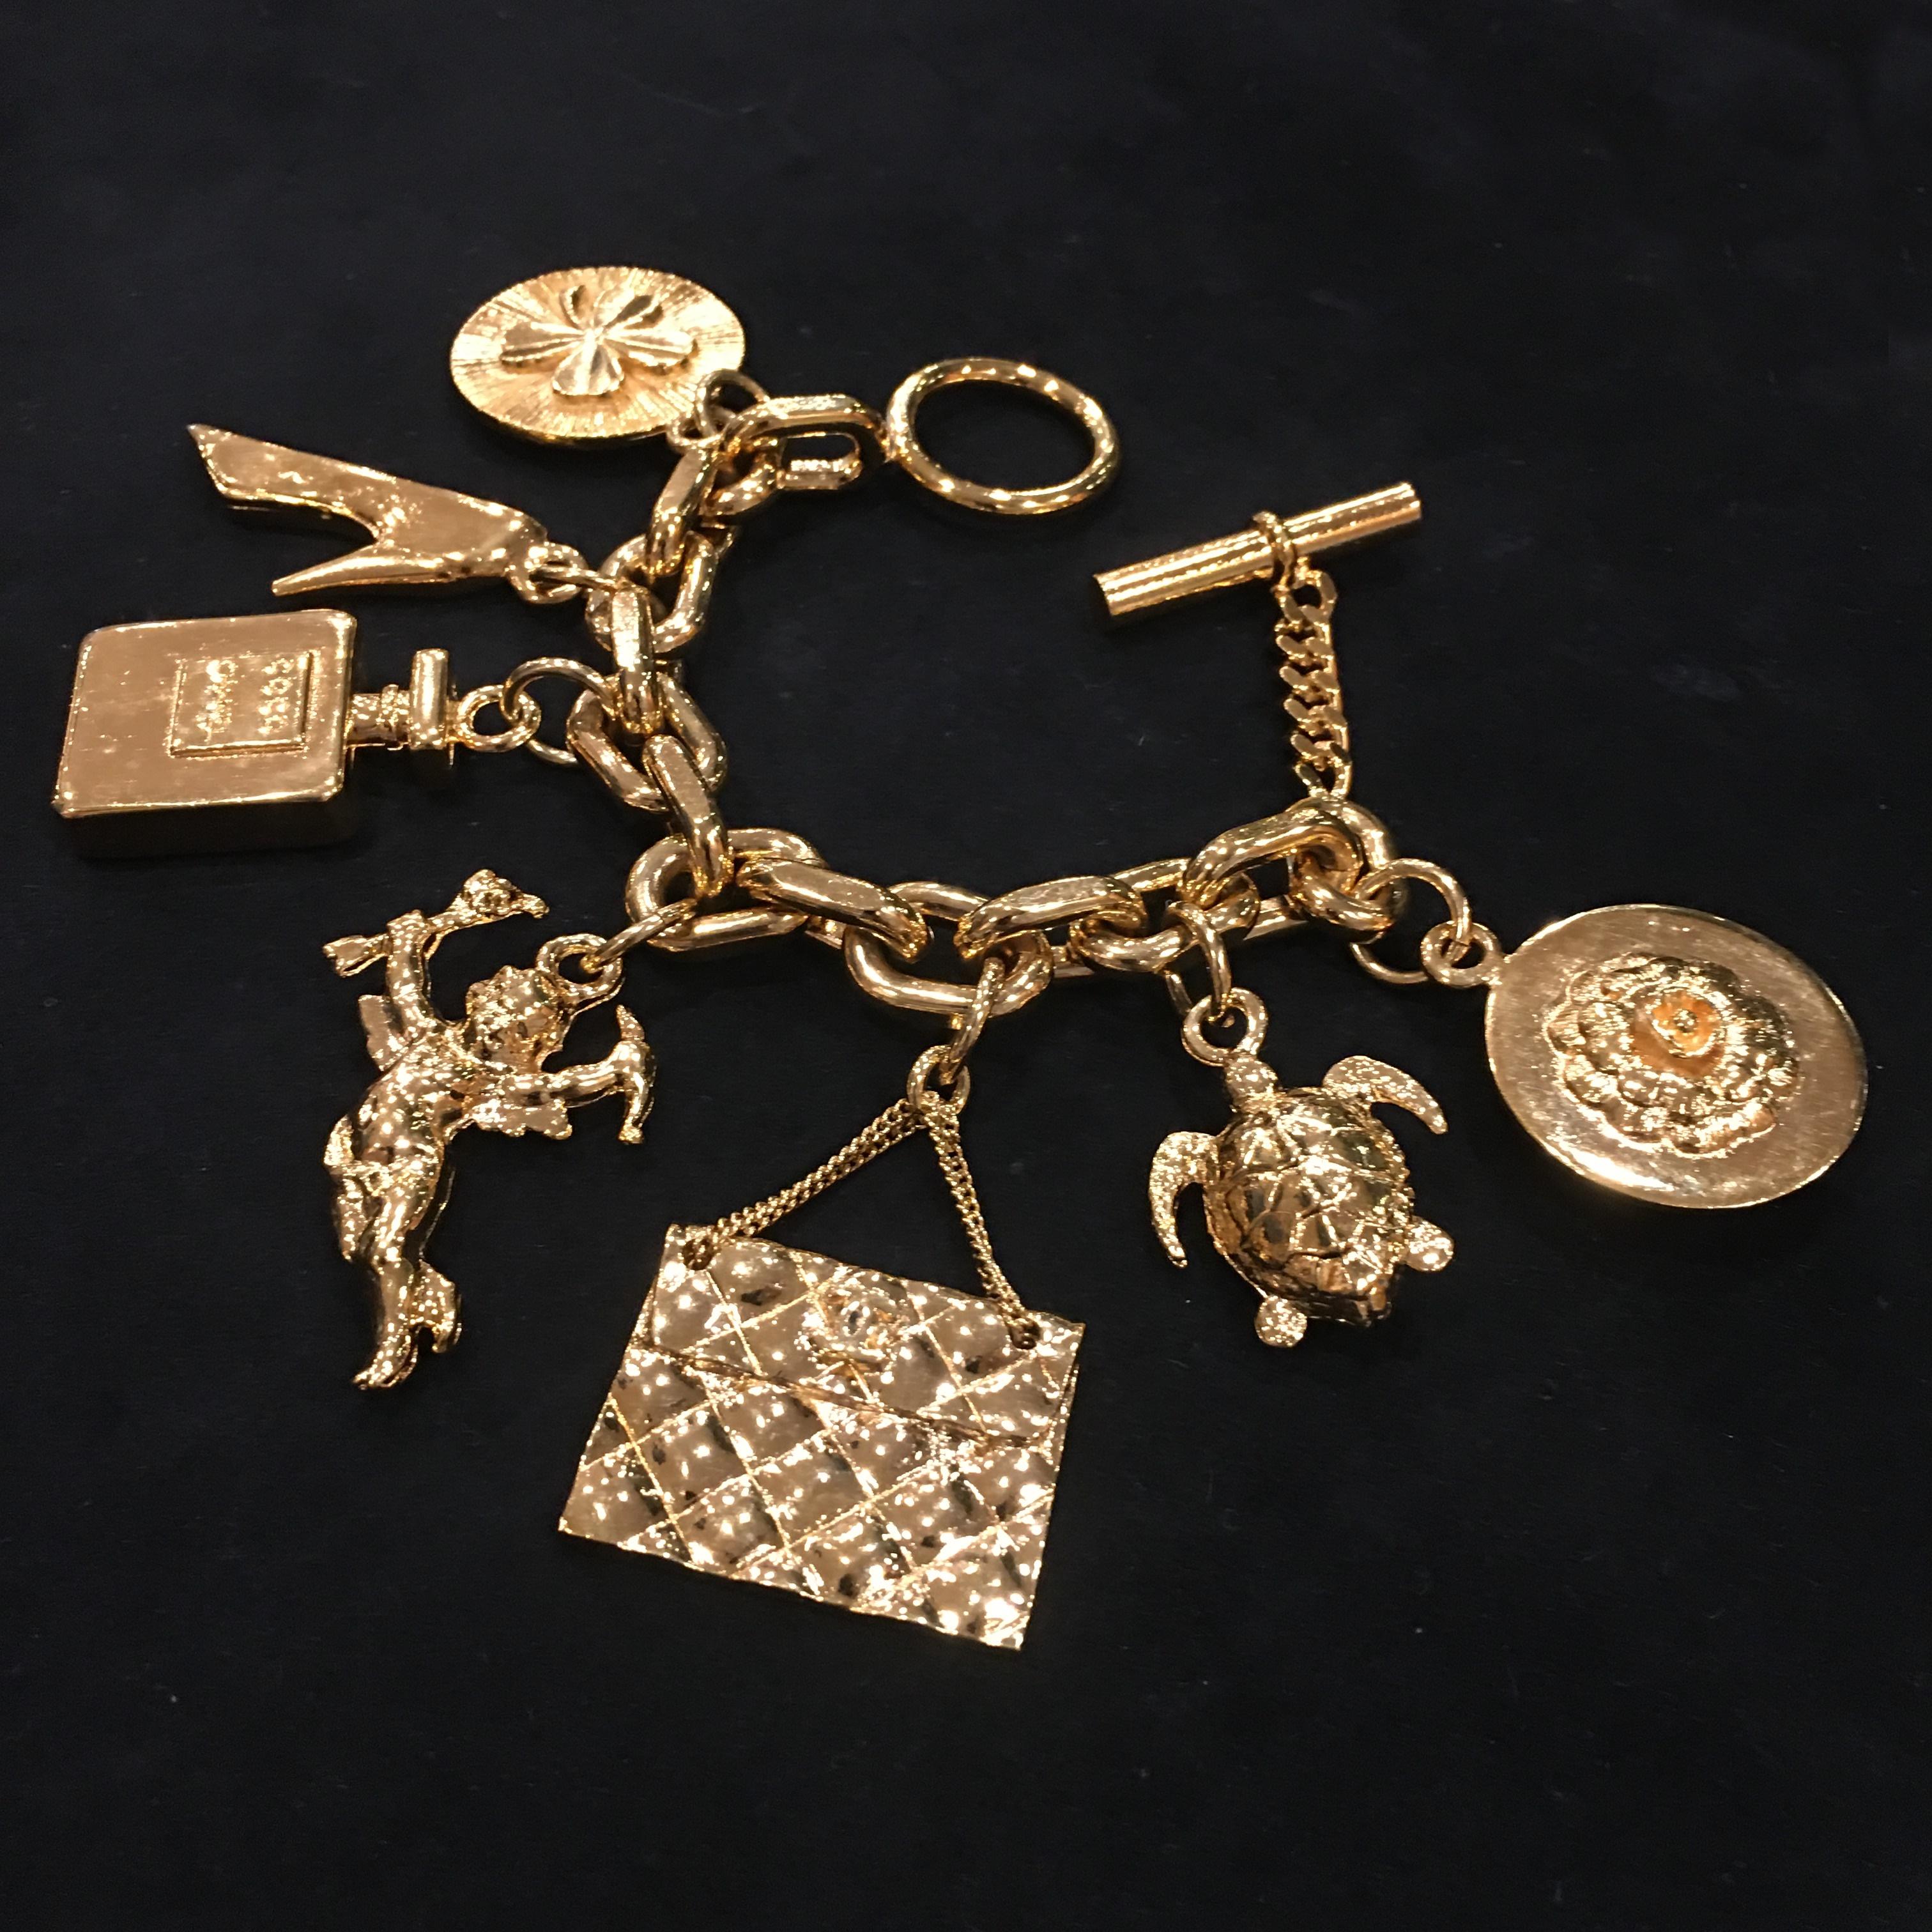 Brand: Chanel
Reference: JW324
Length of Bracelet: 20cm
Material: Gilt Metal / Gold Plated
Year: 1970-80’s
Made in France

Please Note: the jewelries are guarantee 100% authentic pre-owned therefore might have signs of tarnish or oxidation , please